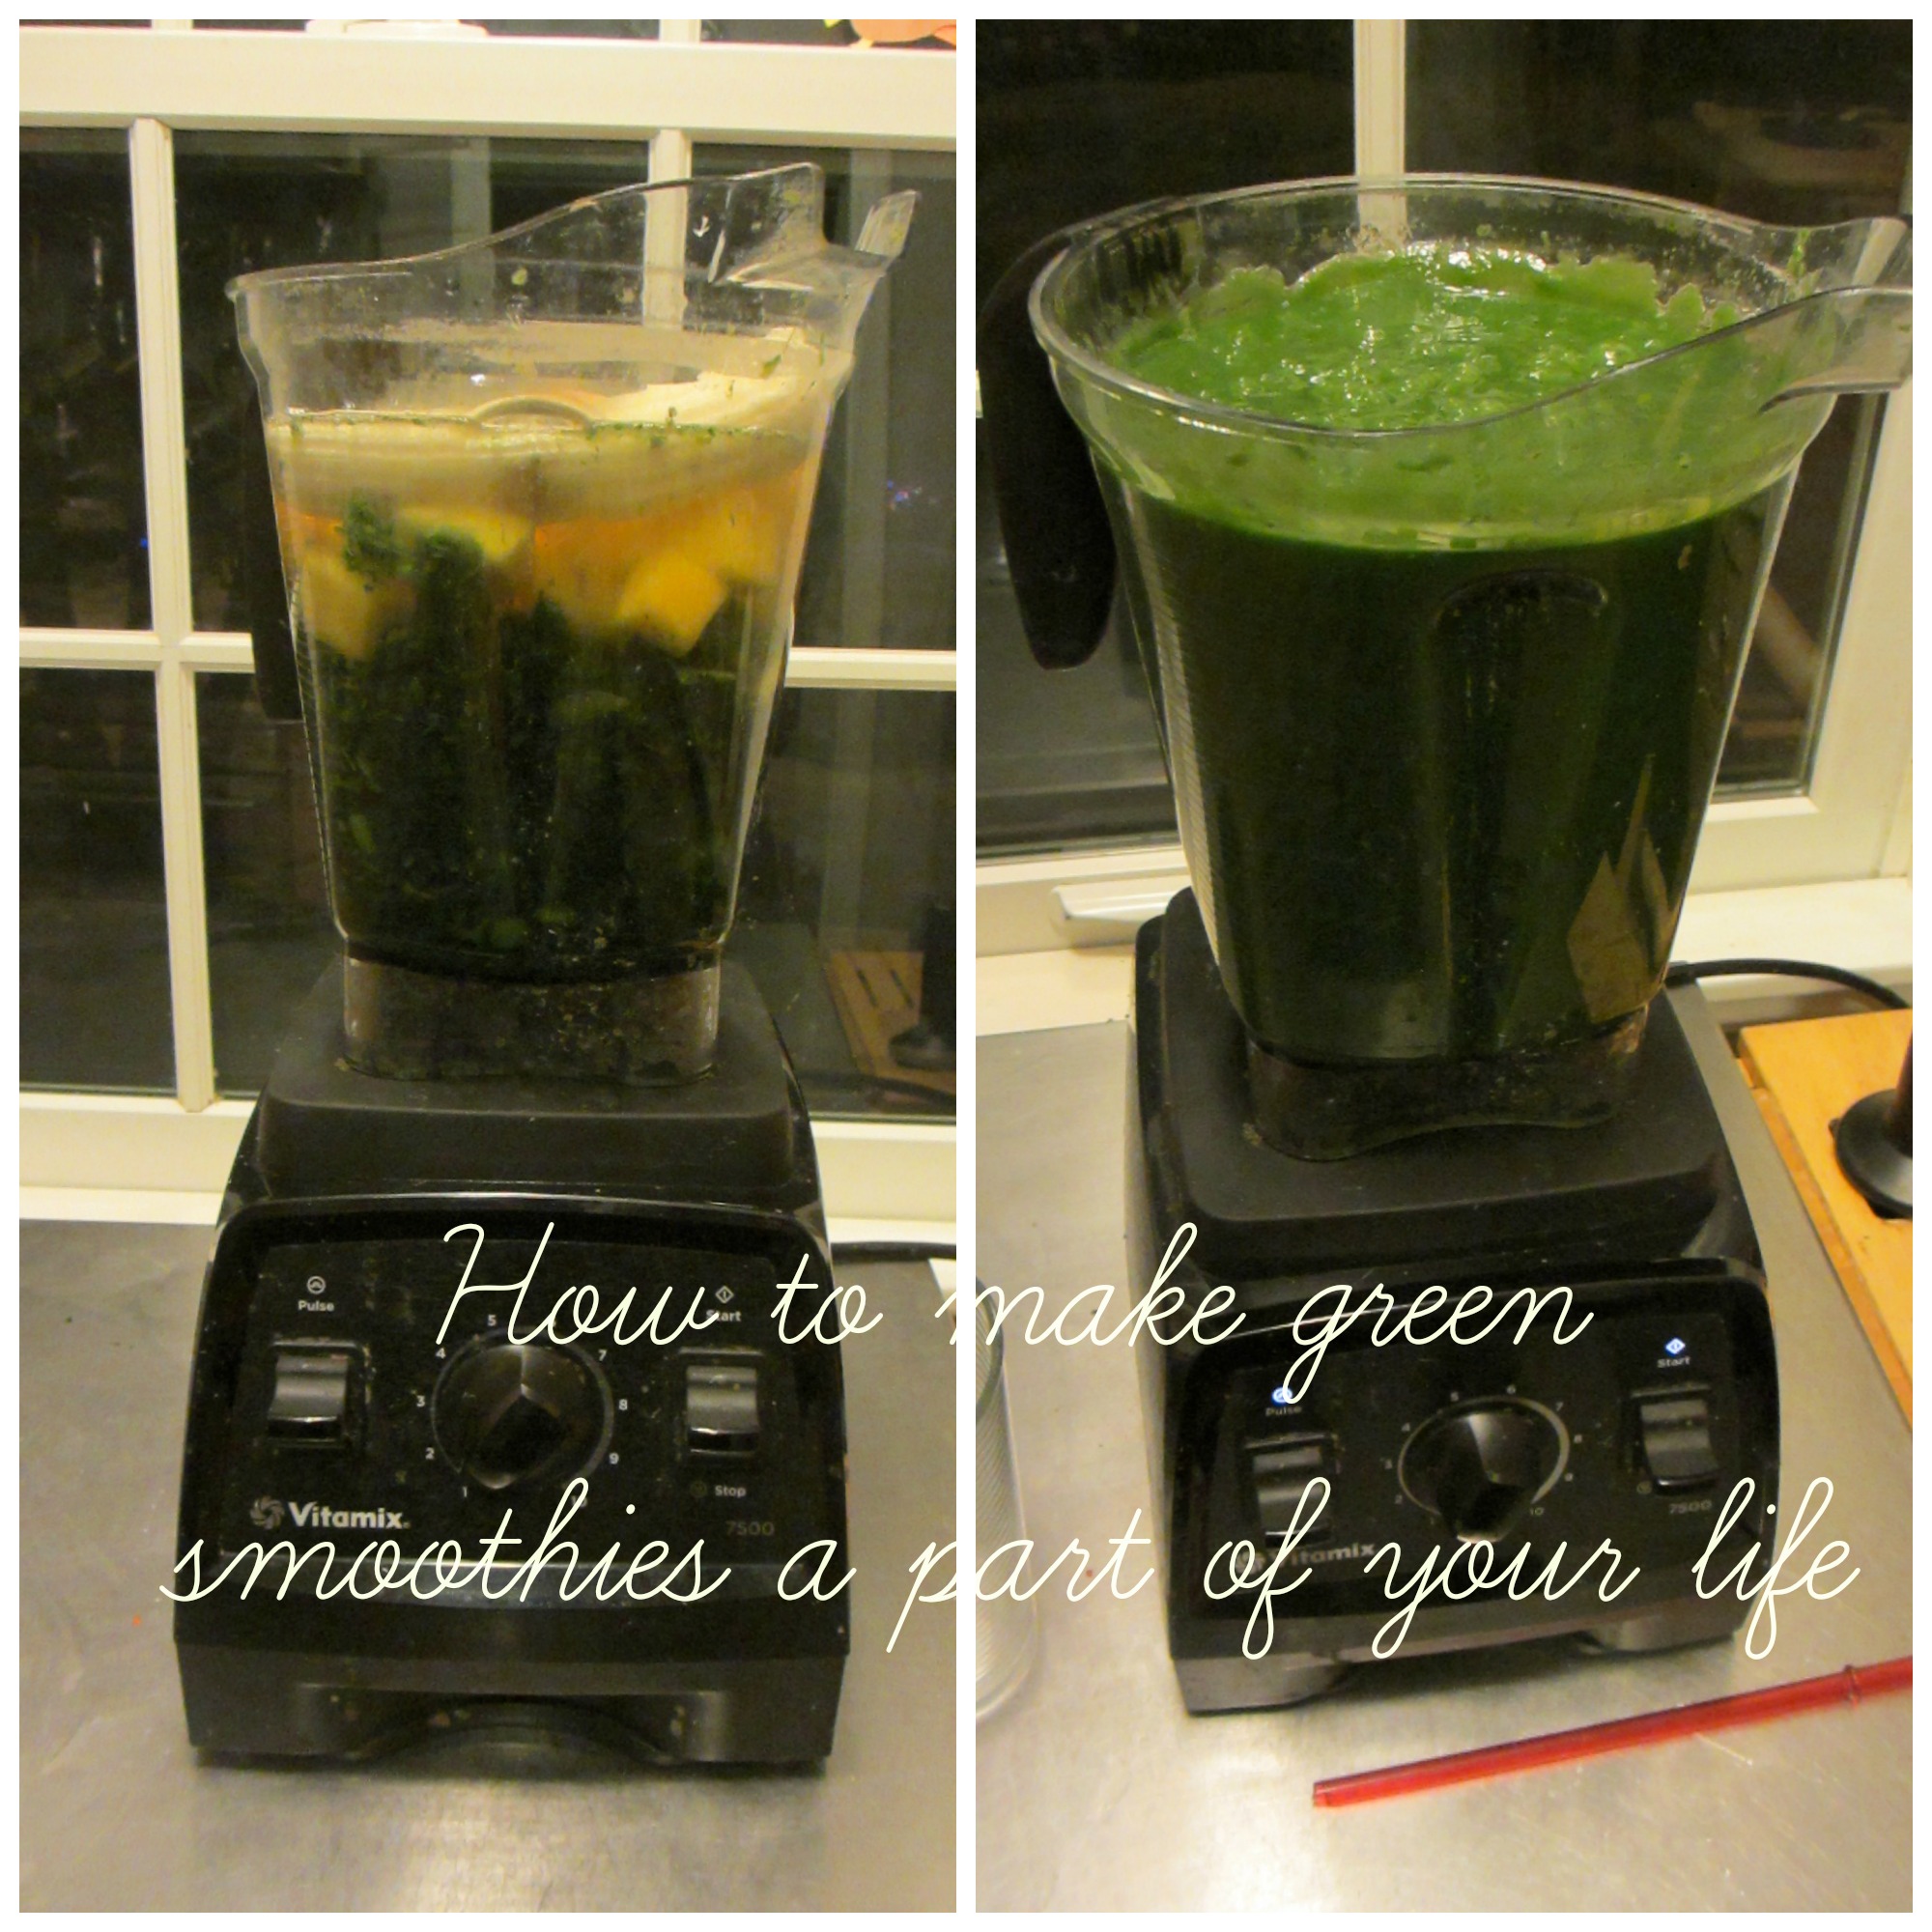 How to make a Vegetable Smoothie using a Vitamix Blender